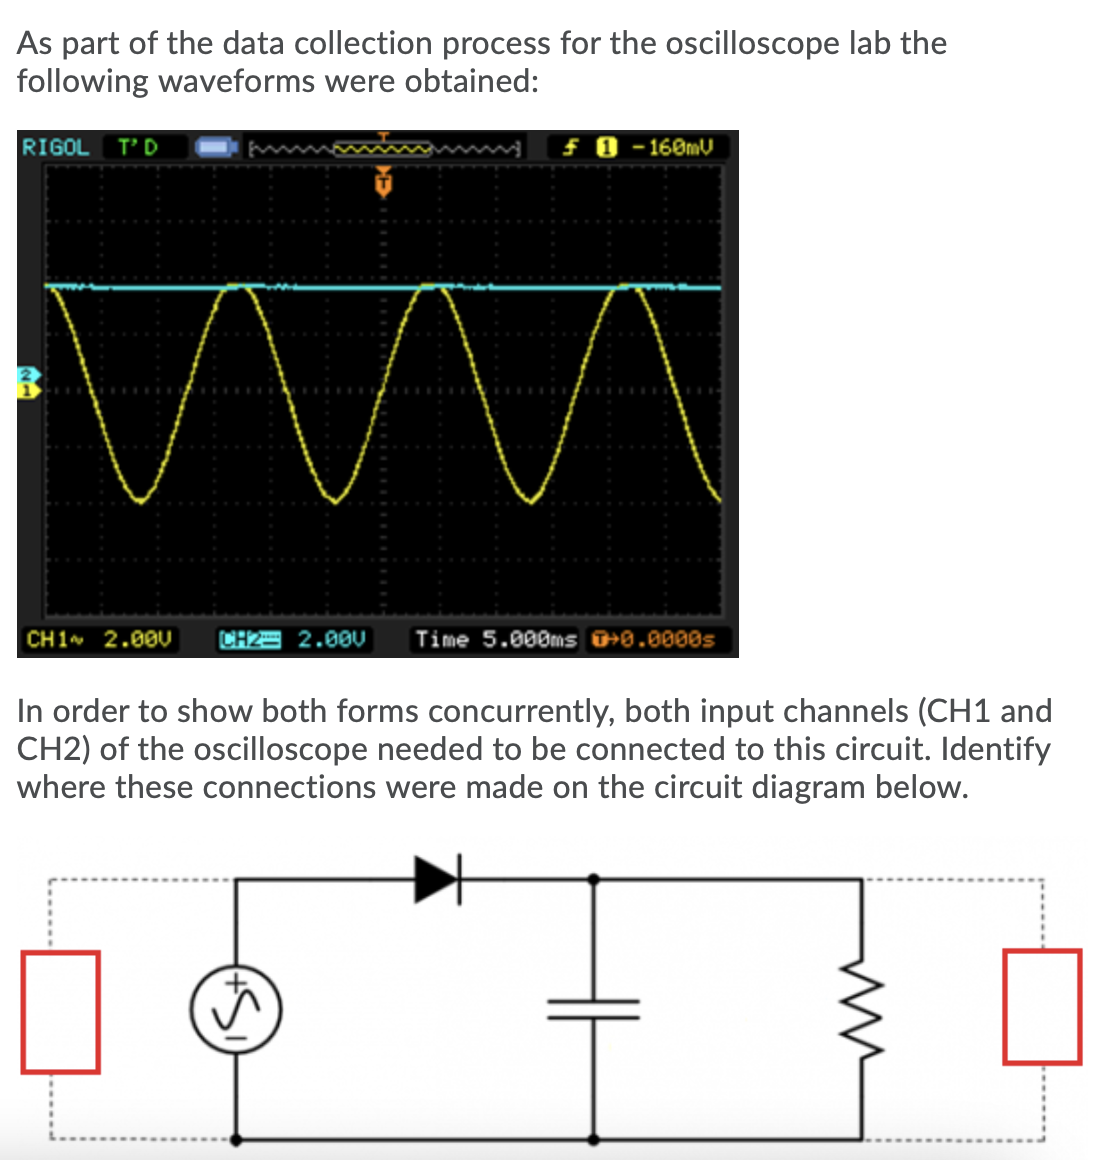 As part of the data collection process for the oscilloscope lab the
following waveforms were obtained:
RIGOL
T'D
f 0 - 160MV
CH1 2.00U
CH2= 2.00U
Time 5.000ms +0.0000s
In order to show both forms concurrently, both input channels (CH1 and
CH2) of the oscilloscope needed to be connected to this circuit. Identify
where these connections were made on the circuit diagram below.
